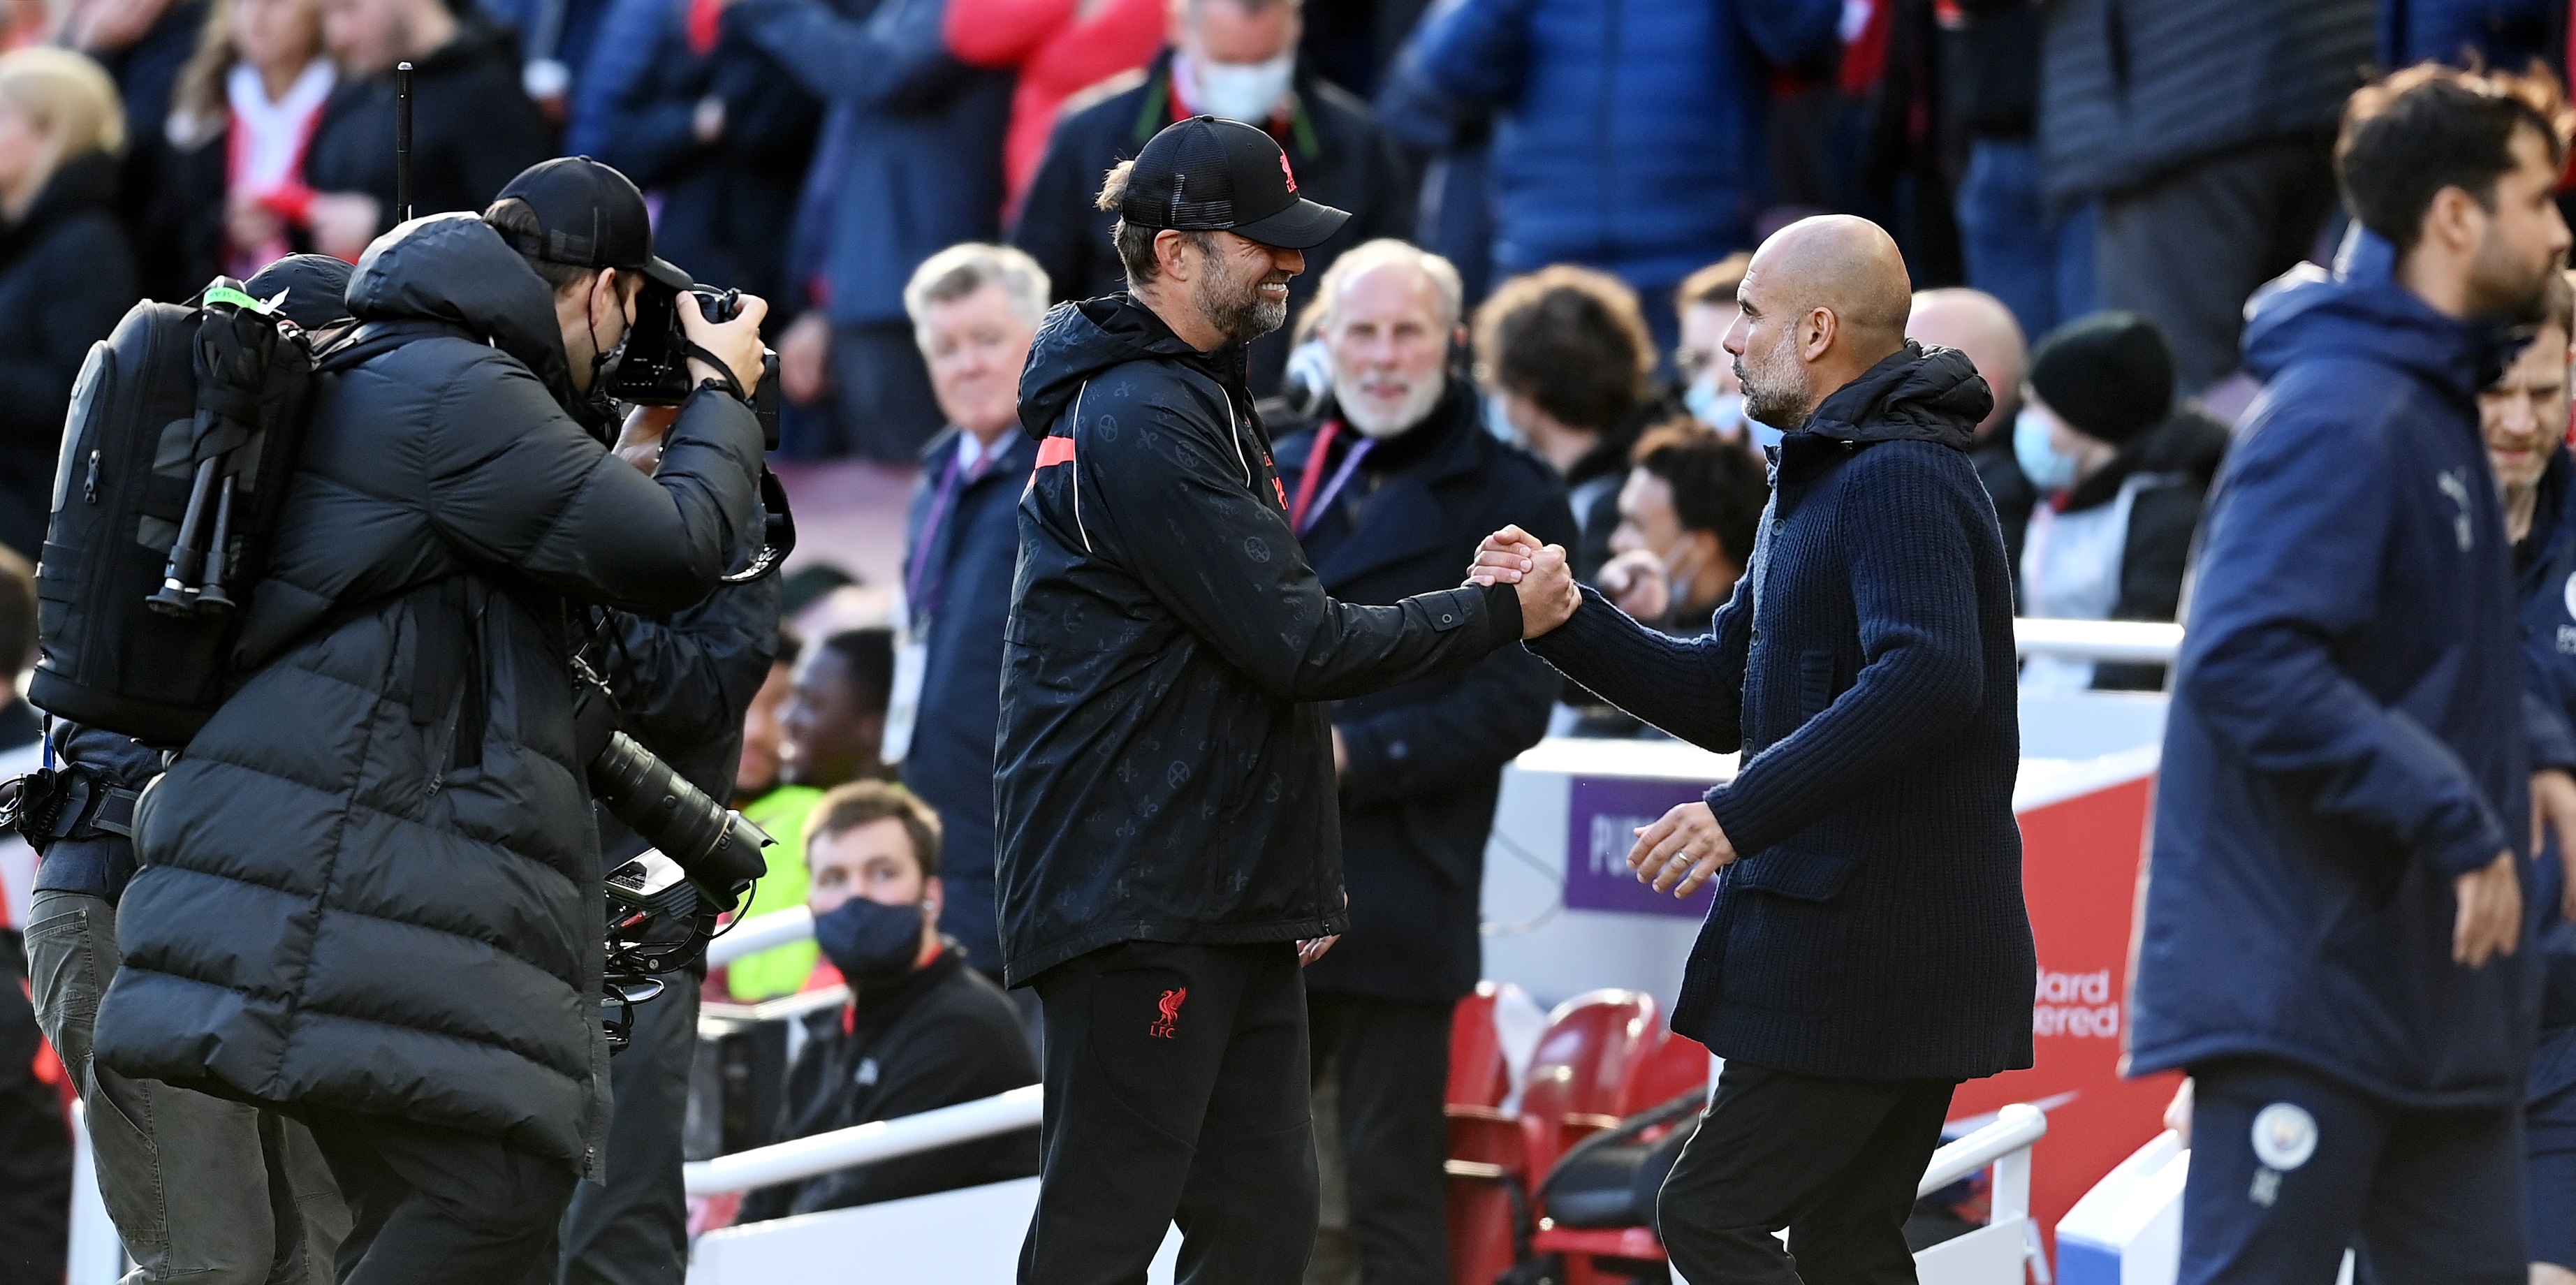 ‘Pushed each other to crazy heights’ – Jurgen Klopp discusses Liverpool’s recent rivalry with Manchester City